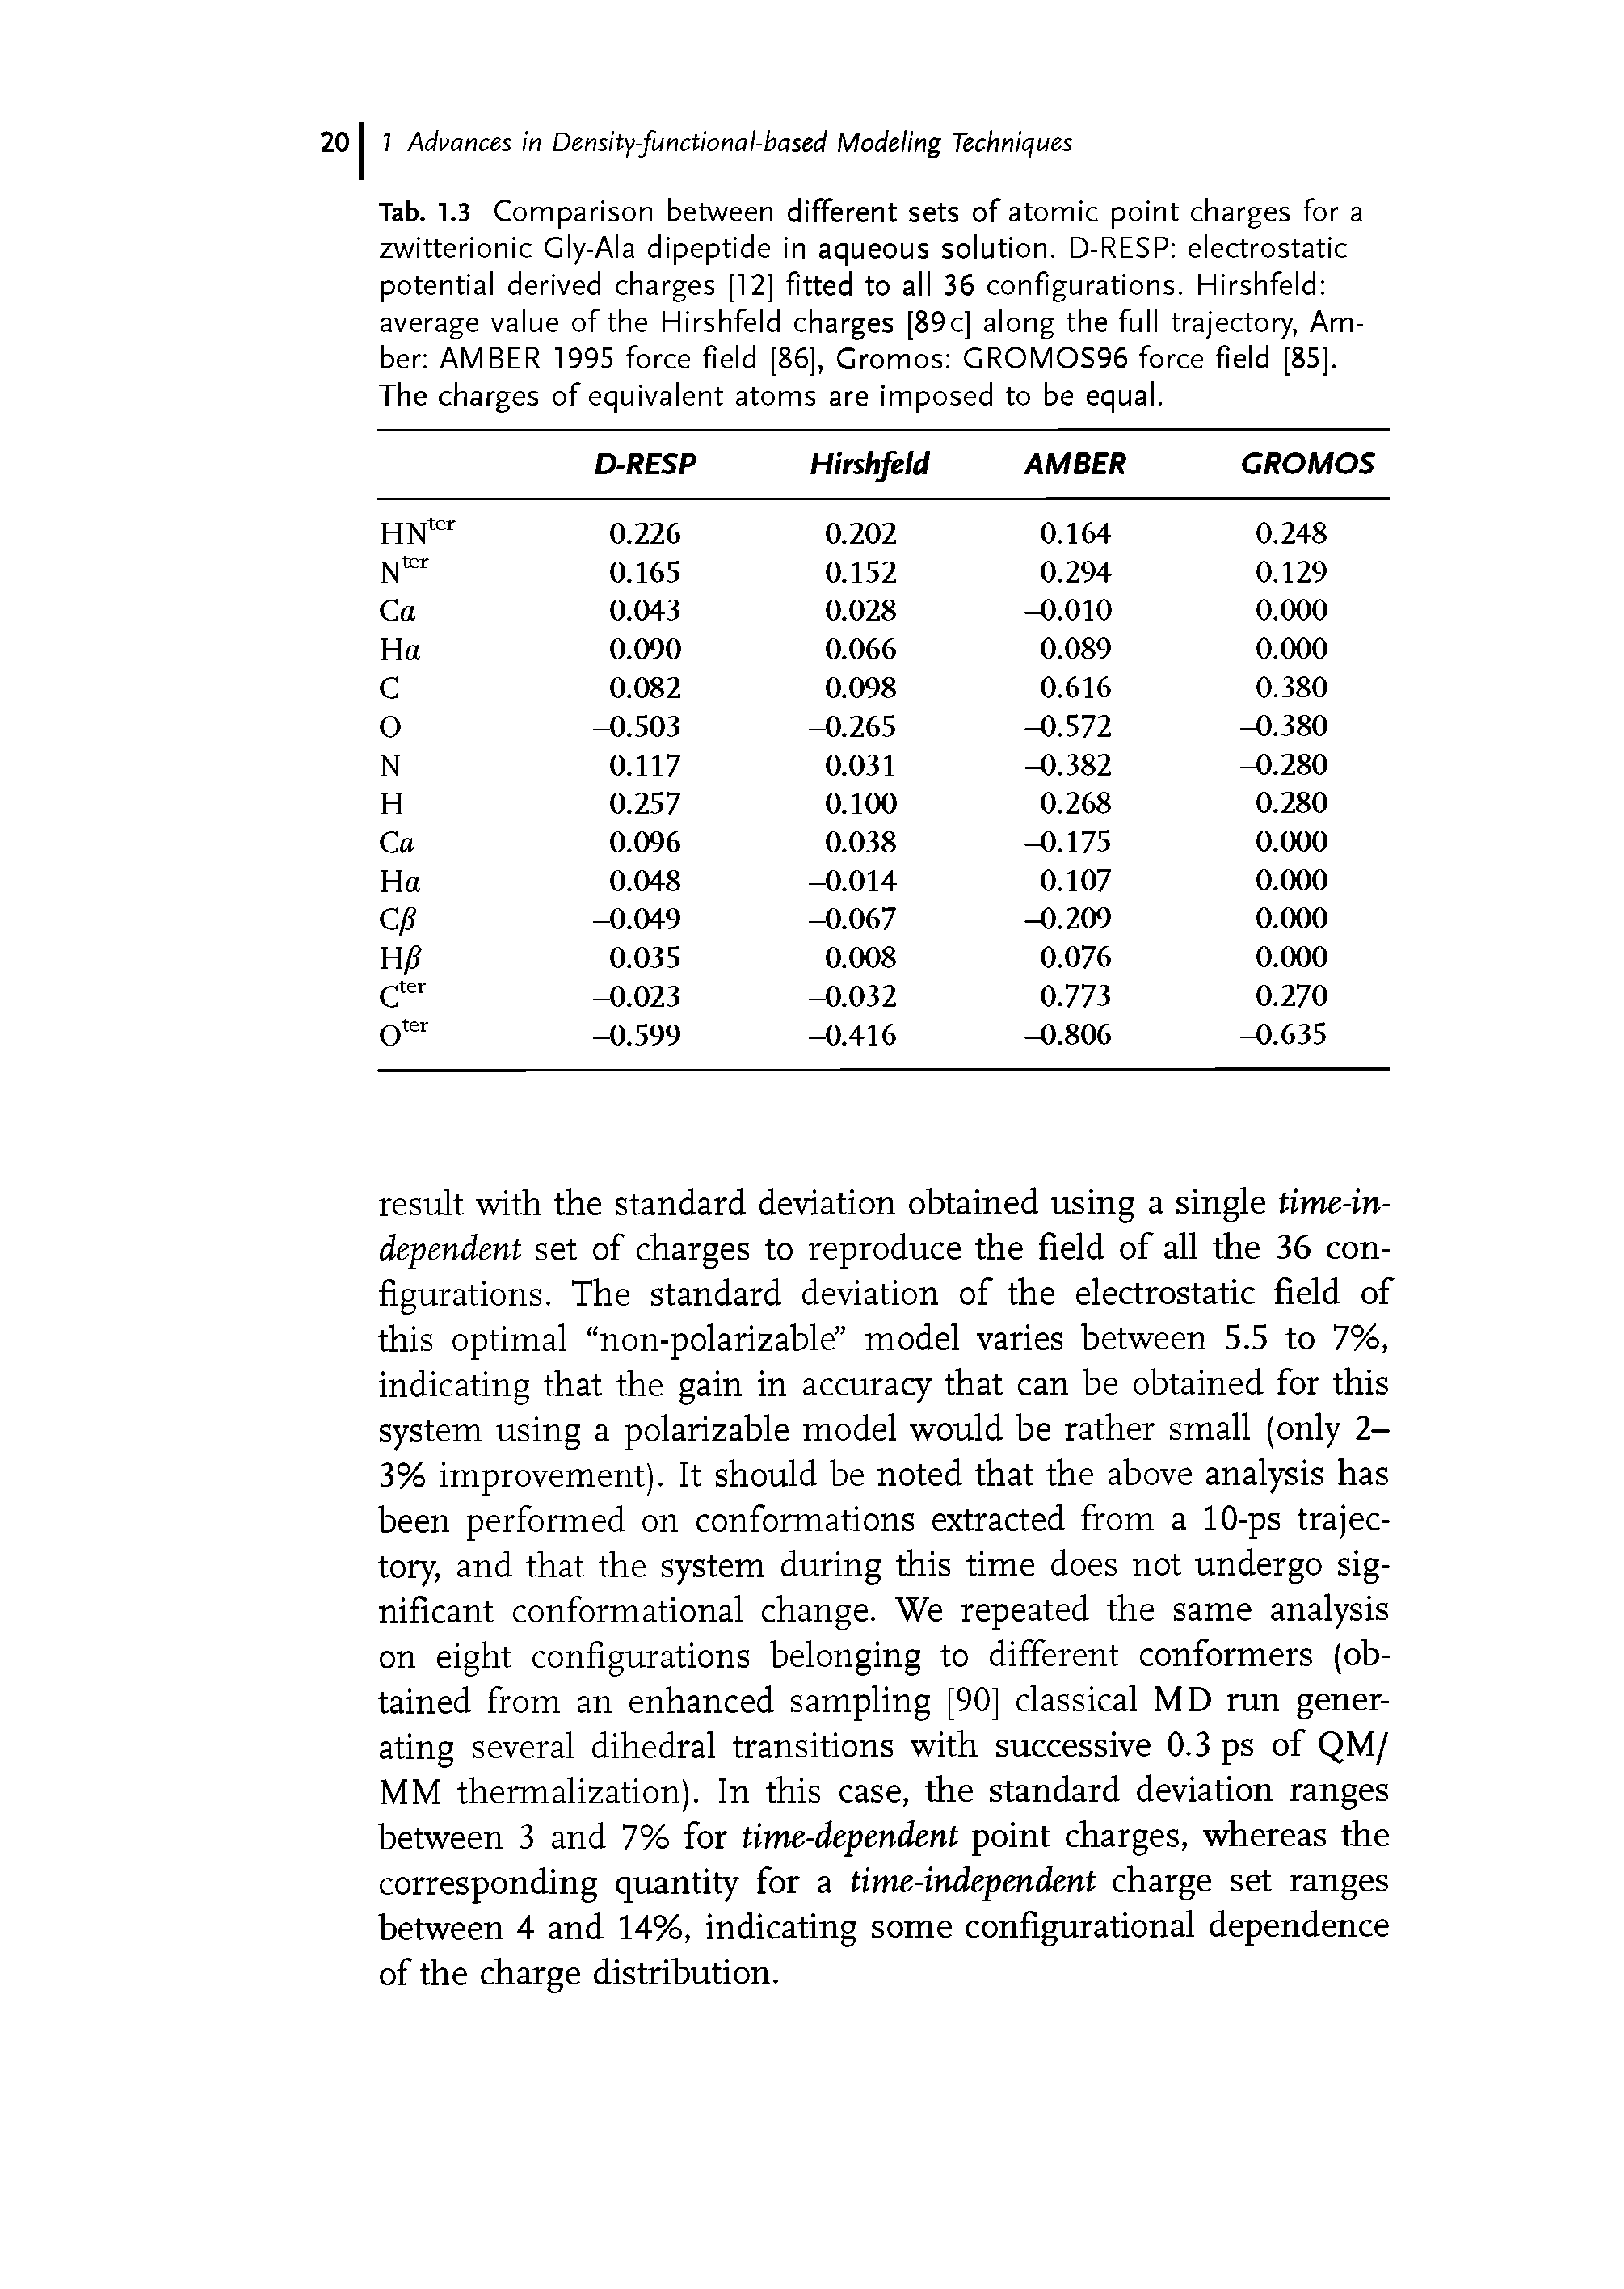 Tab. 1.3 Comparison between different sets of atomic point charges for a zwitterionic Gly-Ala dipeptide in aqueous solution. D-RESP electrostatic potential derived charges [12] fitted to all 36 configurations. Hirshfeld average value of the Hirshfeld charges [89c] along the full trajectory, Amber AMBER 1995 force field [86], Gromos GROMOS96 force field [85], The charges of equivalent atoms are imposed to be equal.